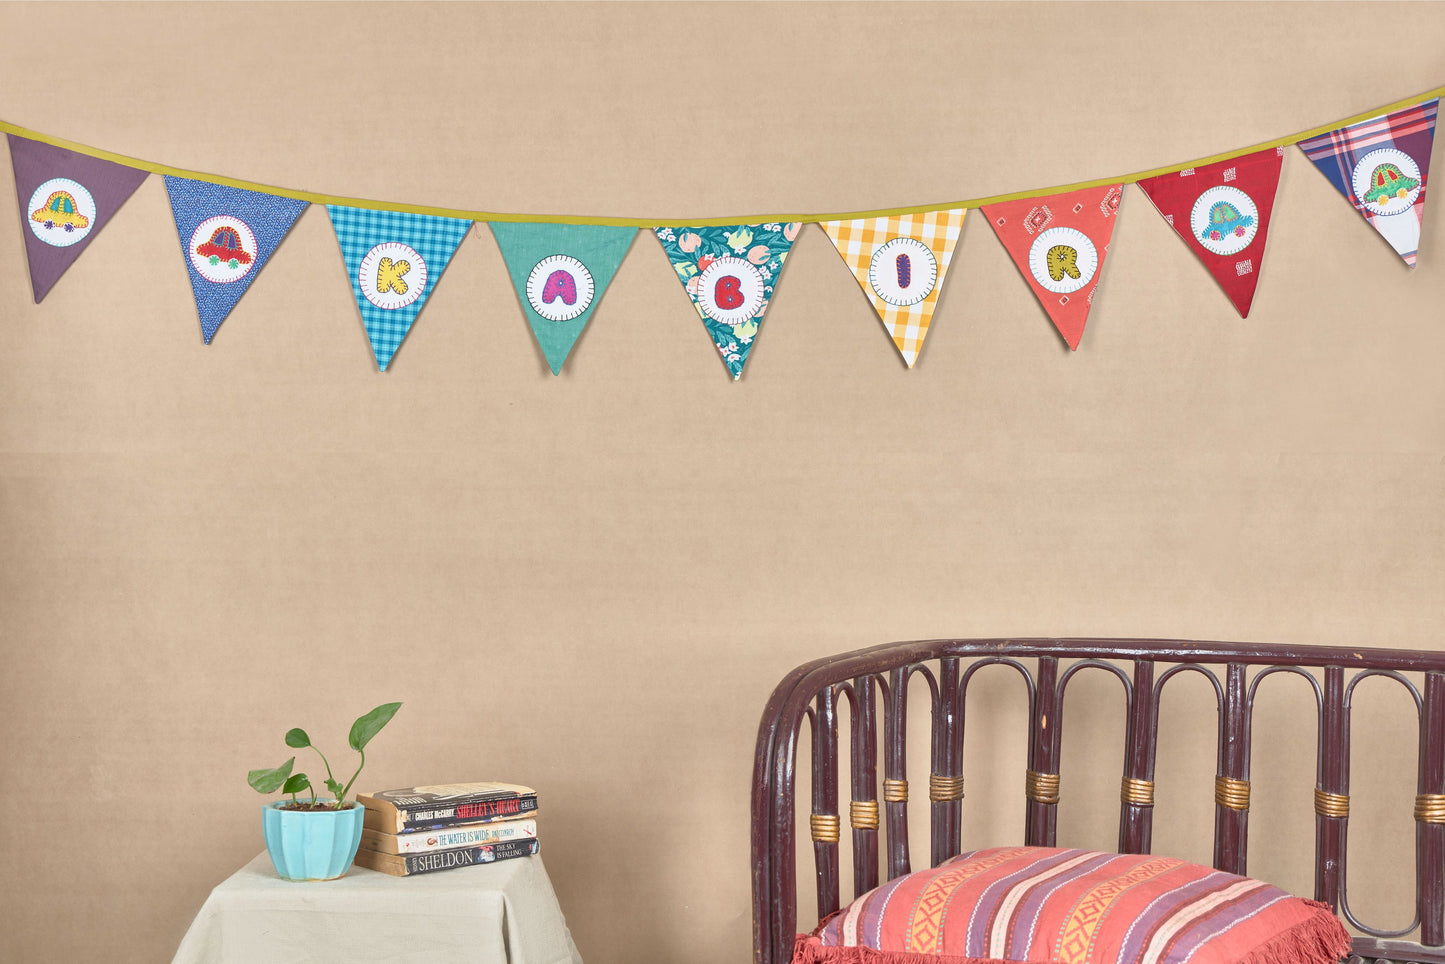 Personalized Name Banner with Cars Motifs (Triangle Flag)